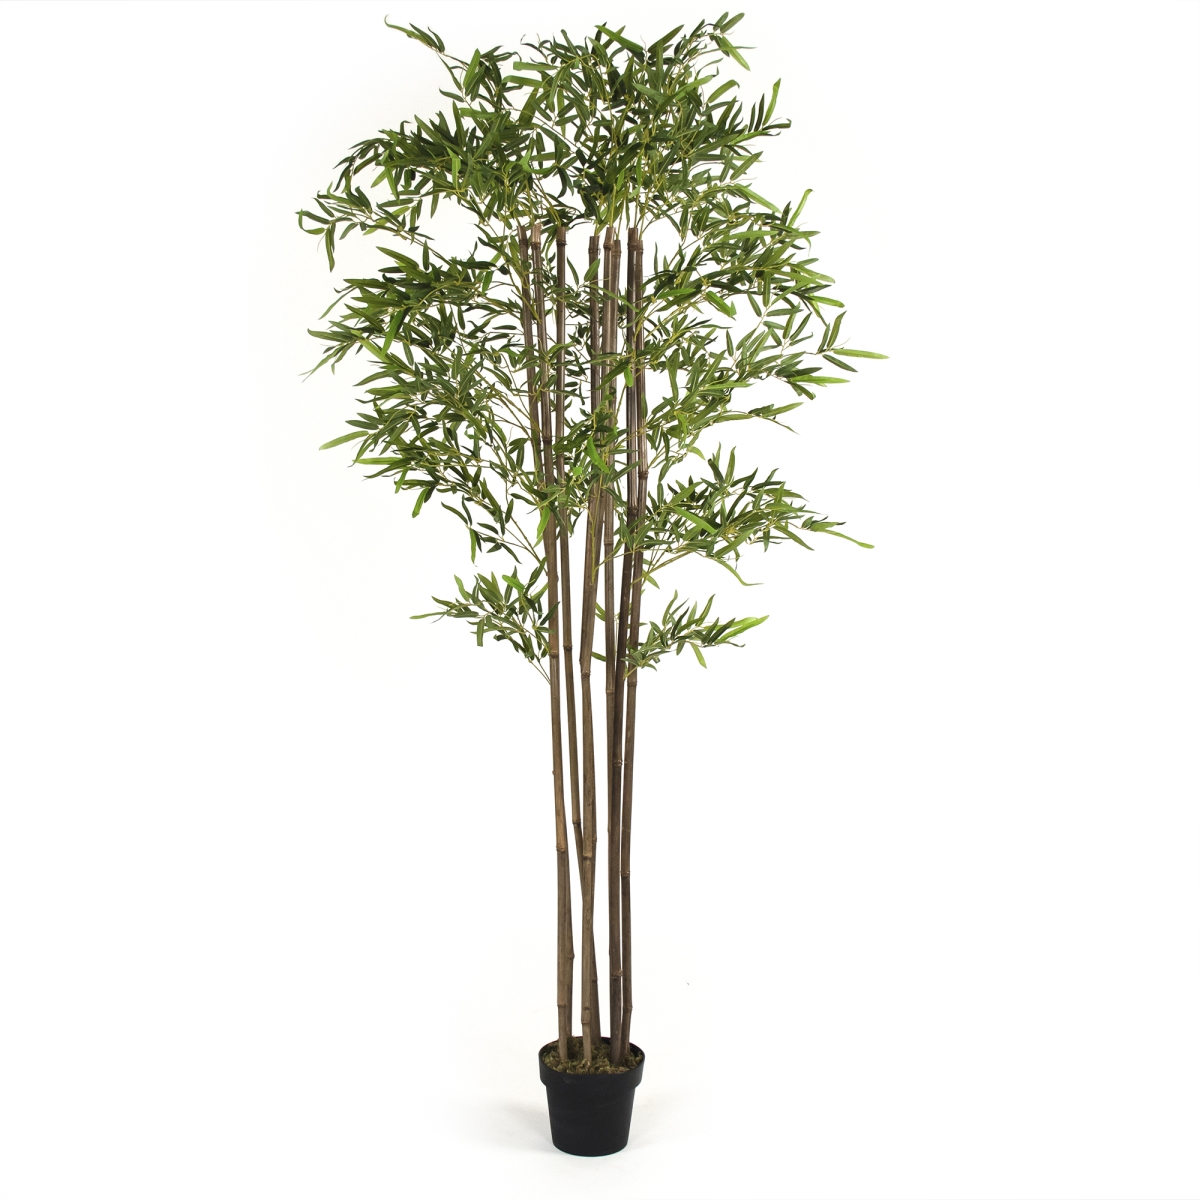 Zen-180503-41 Green Leafed Bamboo Plant In Pot, 41 In.